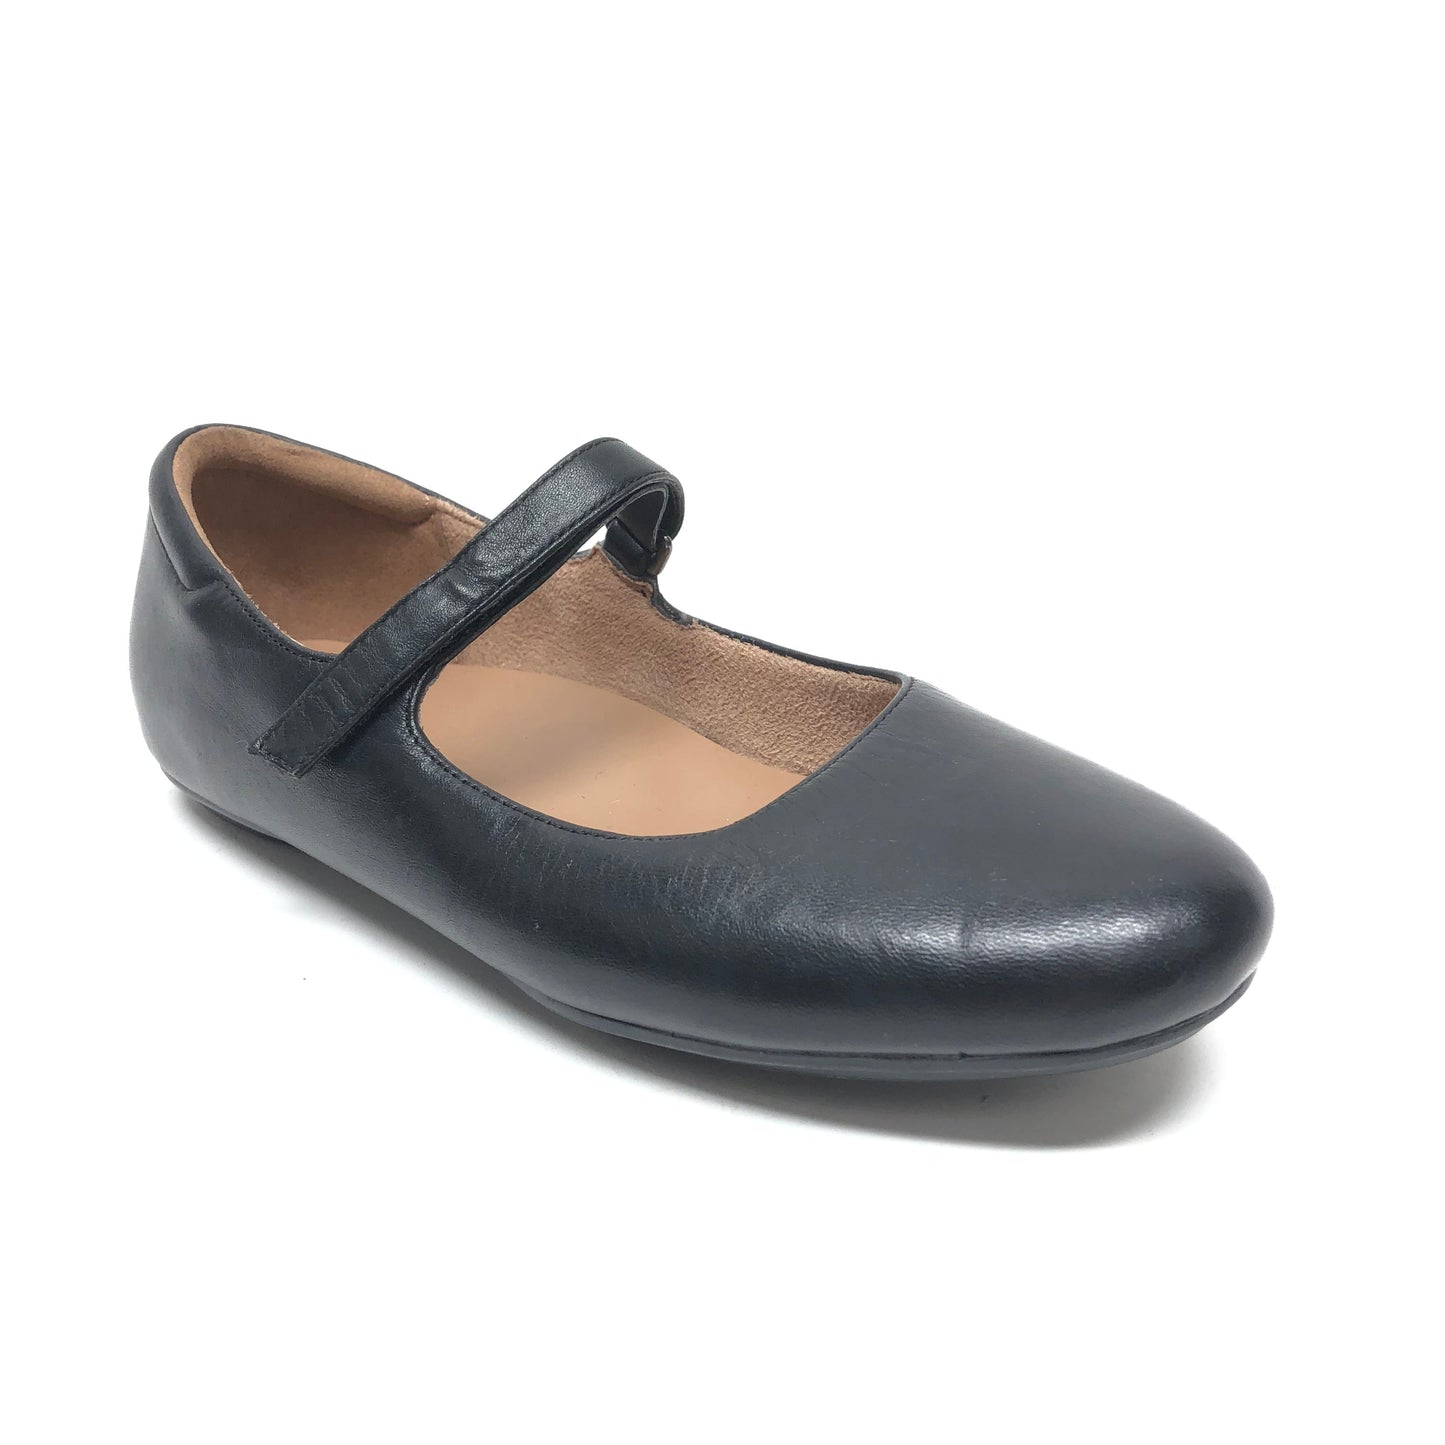 Shoes Flats By Naturalizer  Size: 6